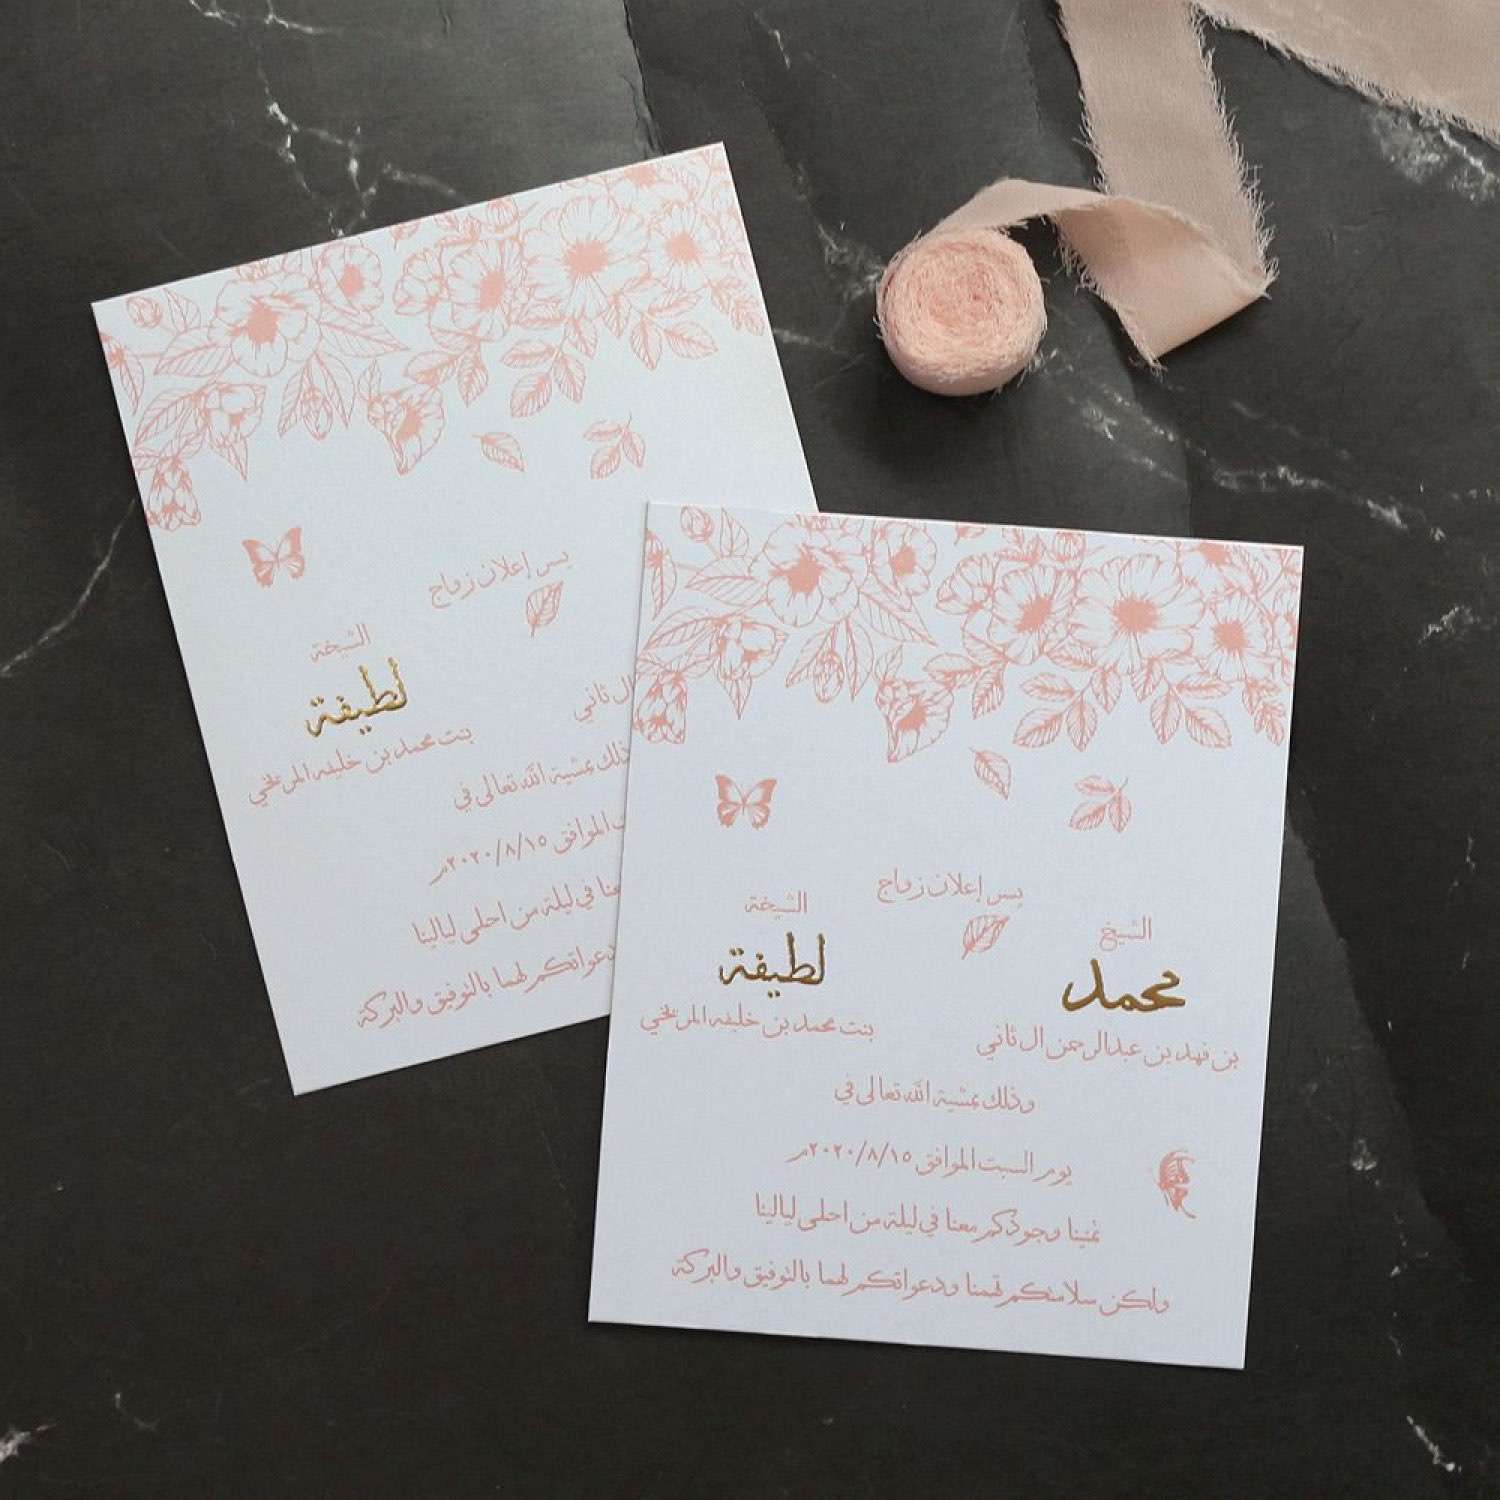 Pocket Invitation Card with Pink Paper Hand Bag Invitation Customized